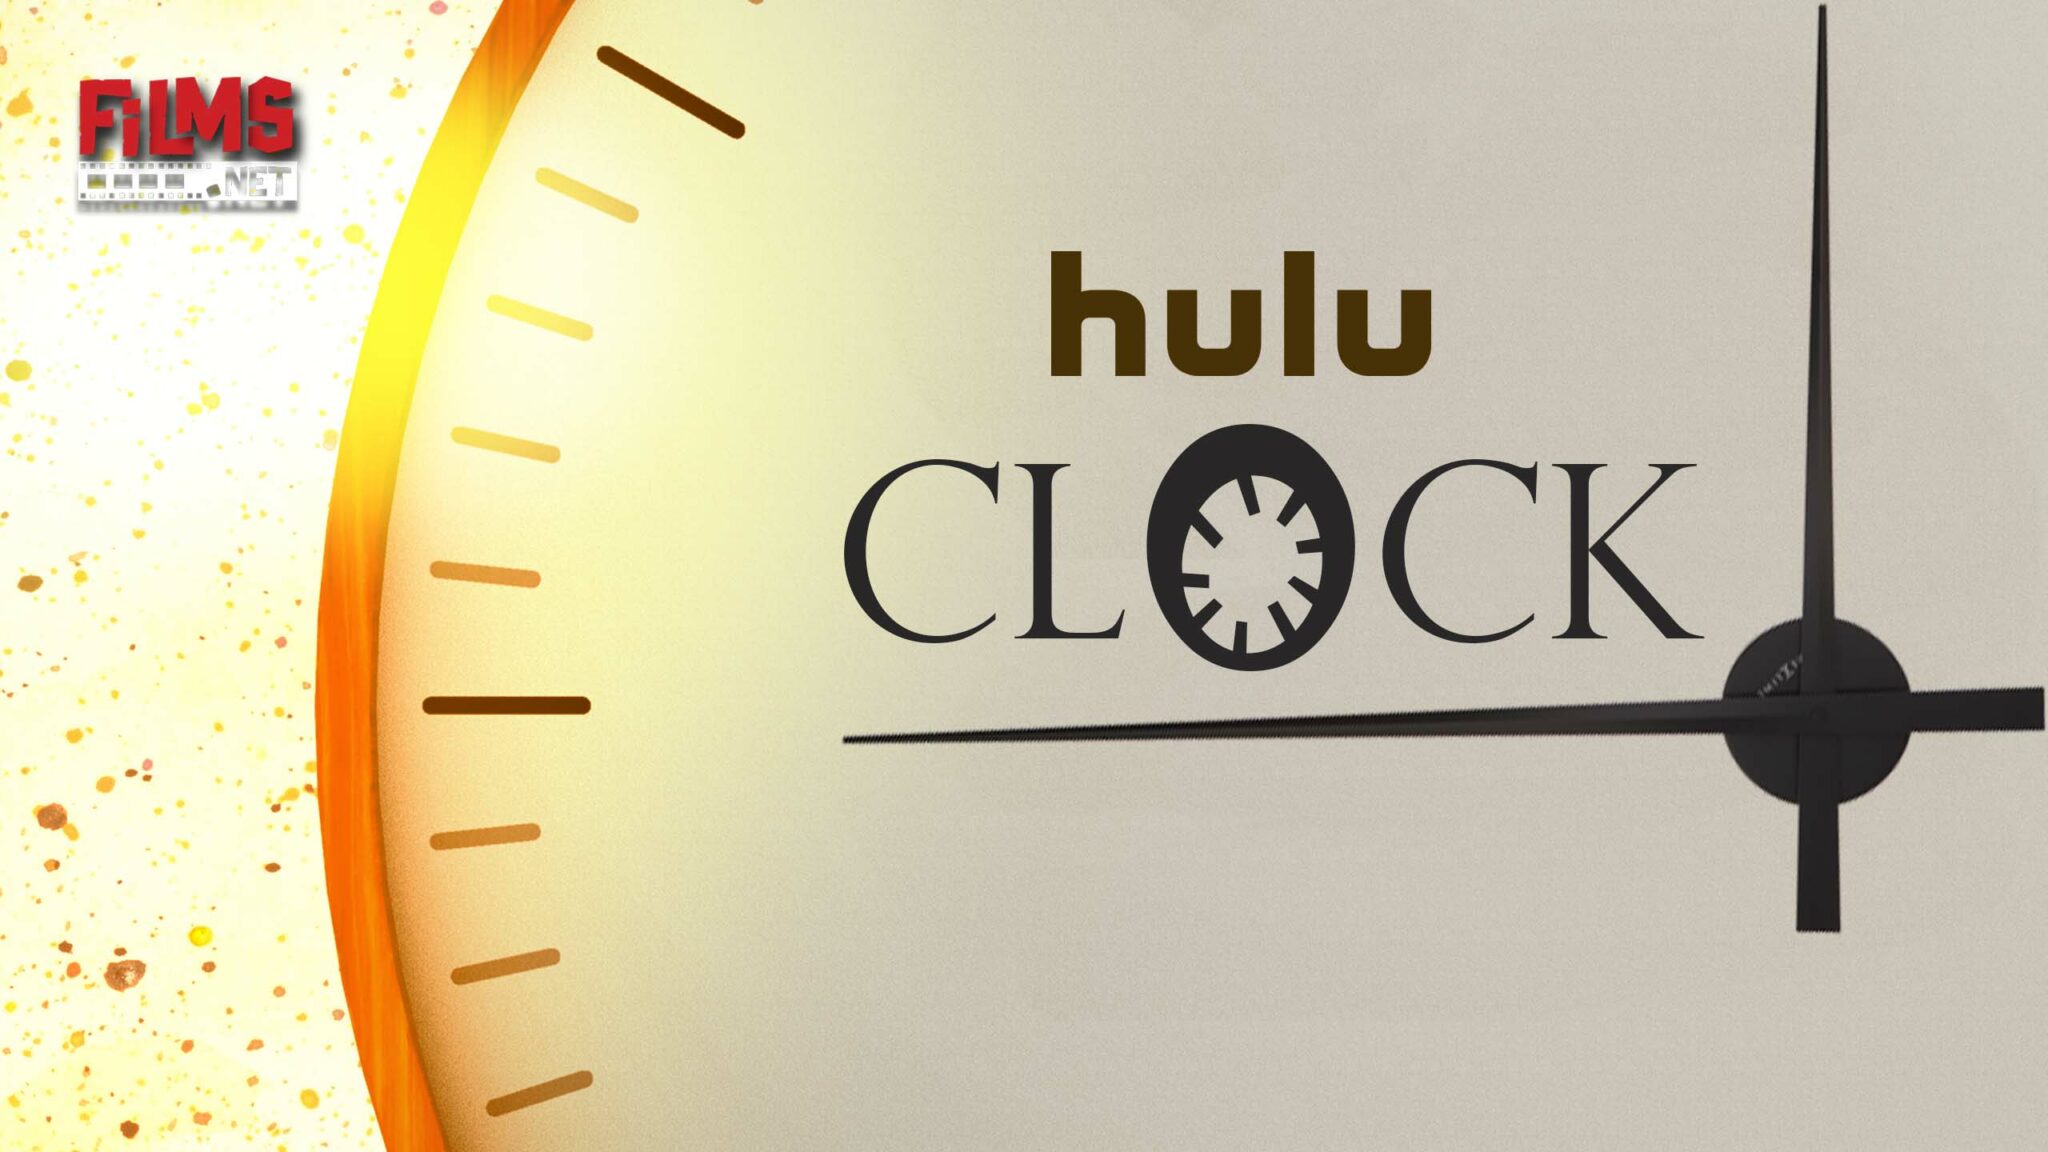 Hulu's Clock: A Thrilling New Series with an Enigmatic Plot - Films.net